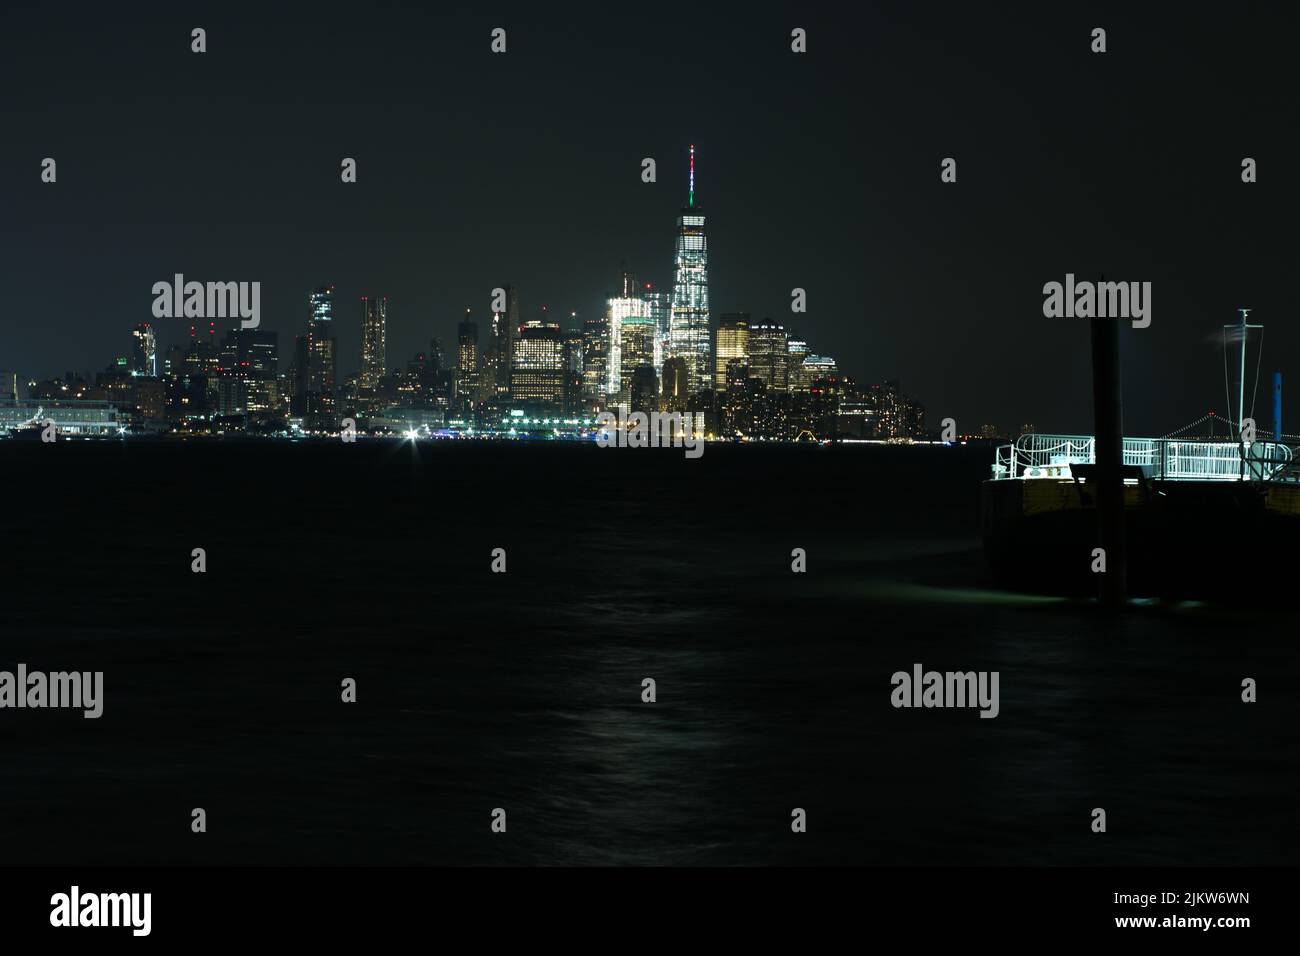 A stunning view of the NYC skyline with bright lights at night Stock Photo